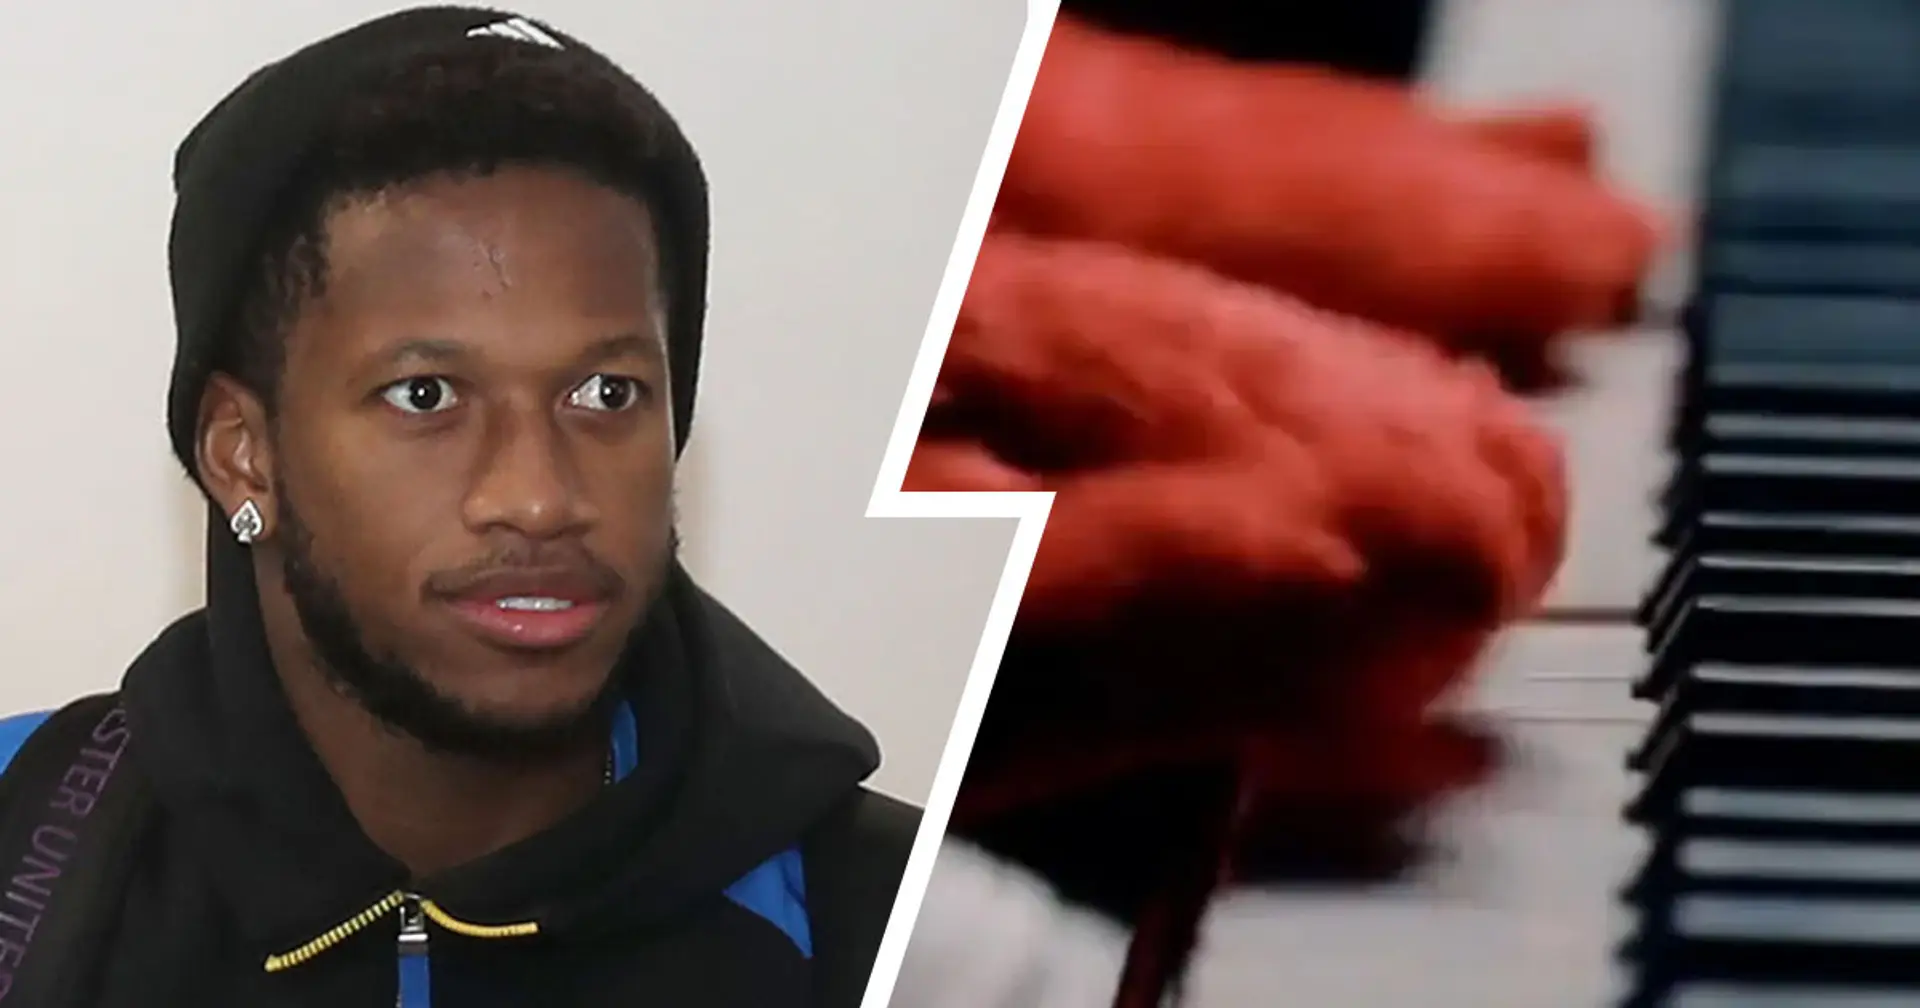 'I carry the piano for artists to play': Fred explains his role at Man United